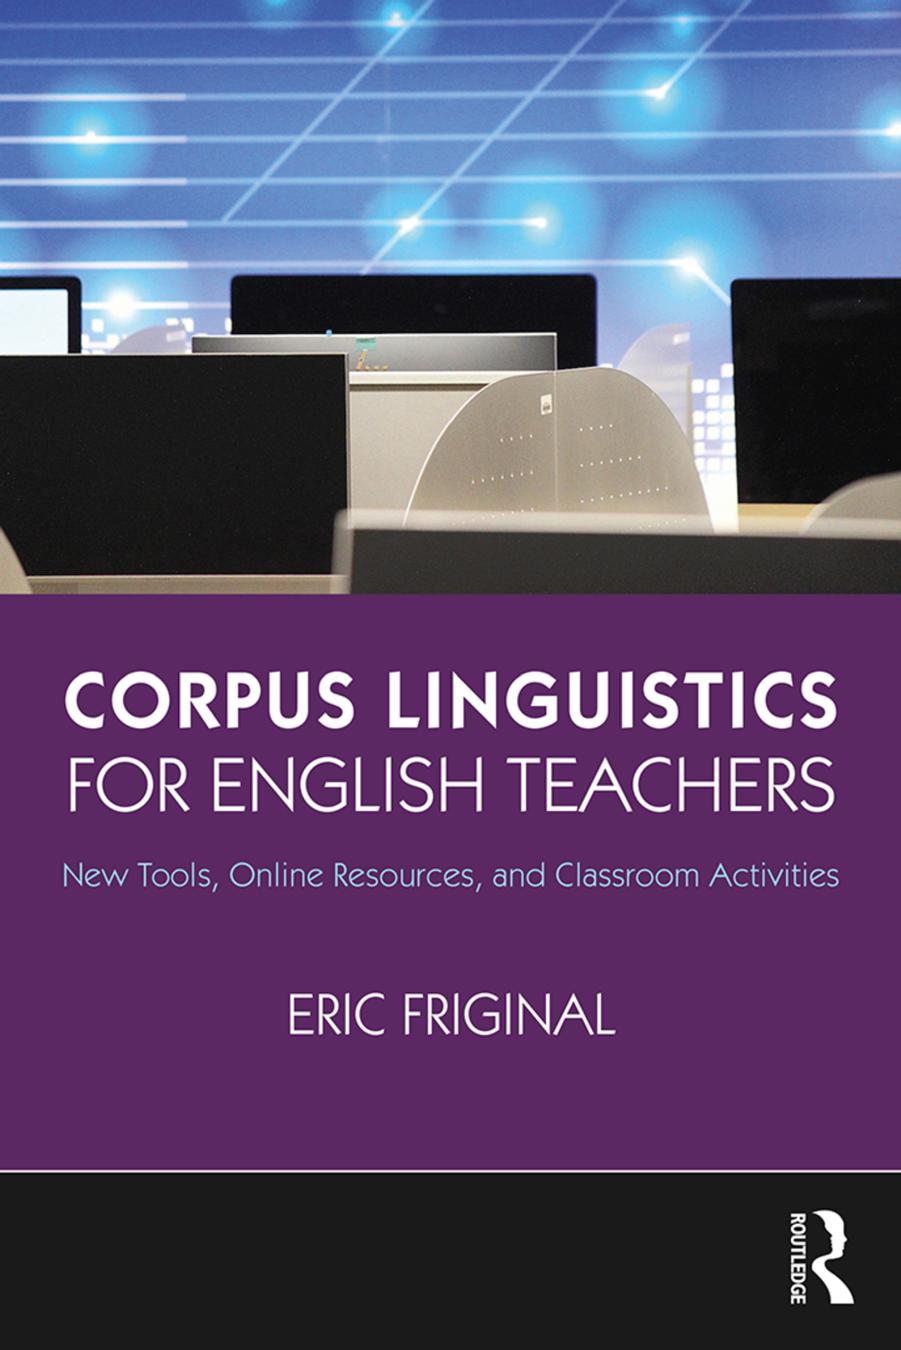 Corpus Linguistics for English Teachers: New Tools, Online Resources, and Classroom Activities